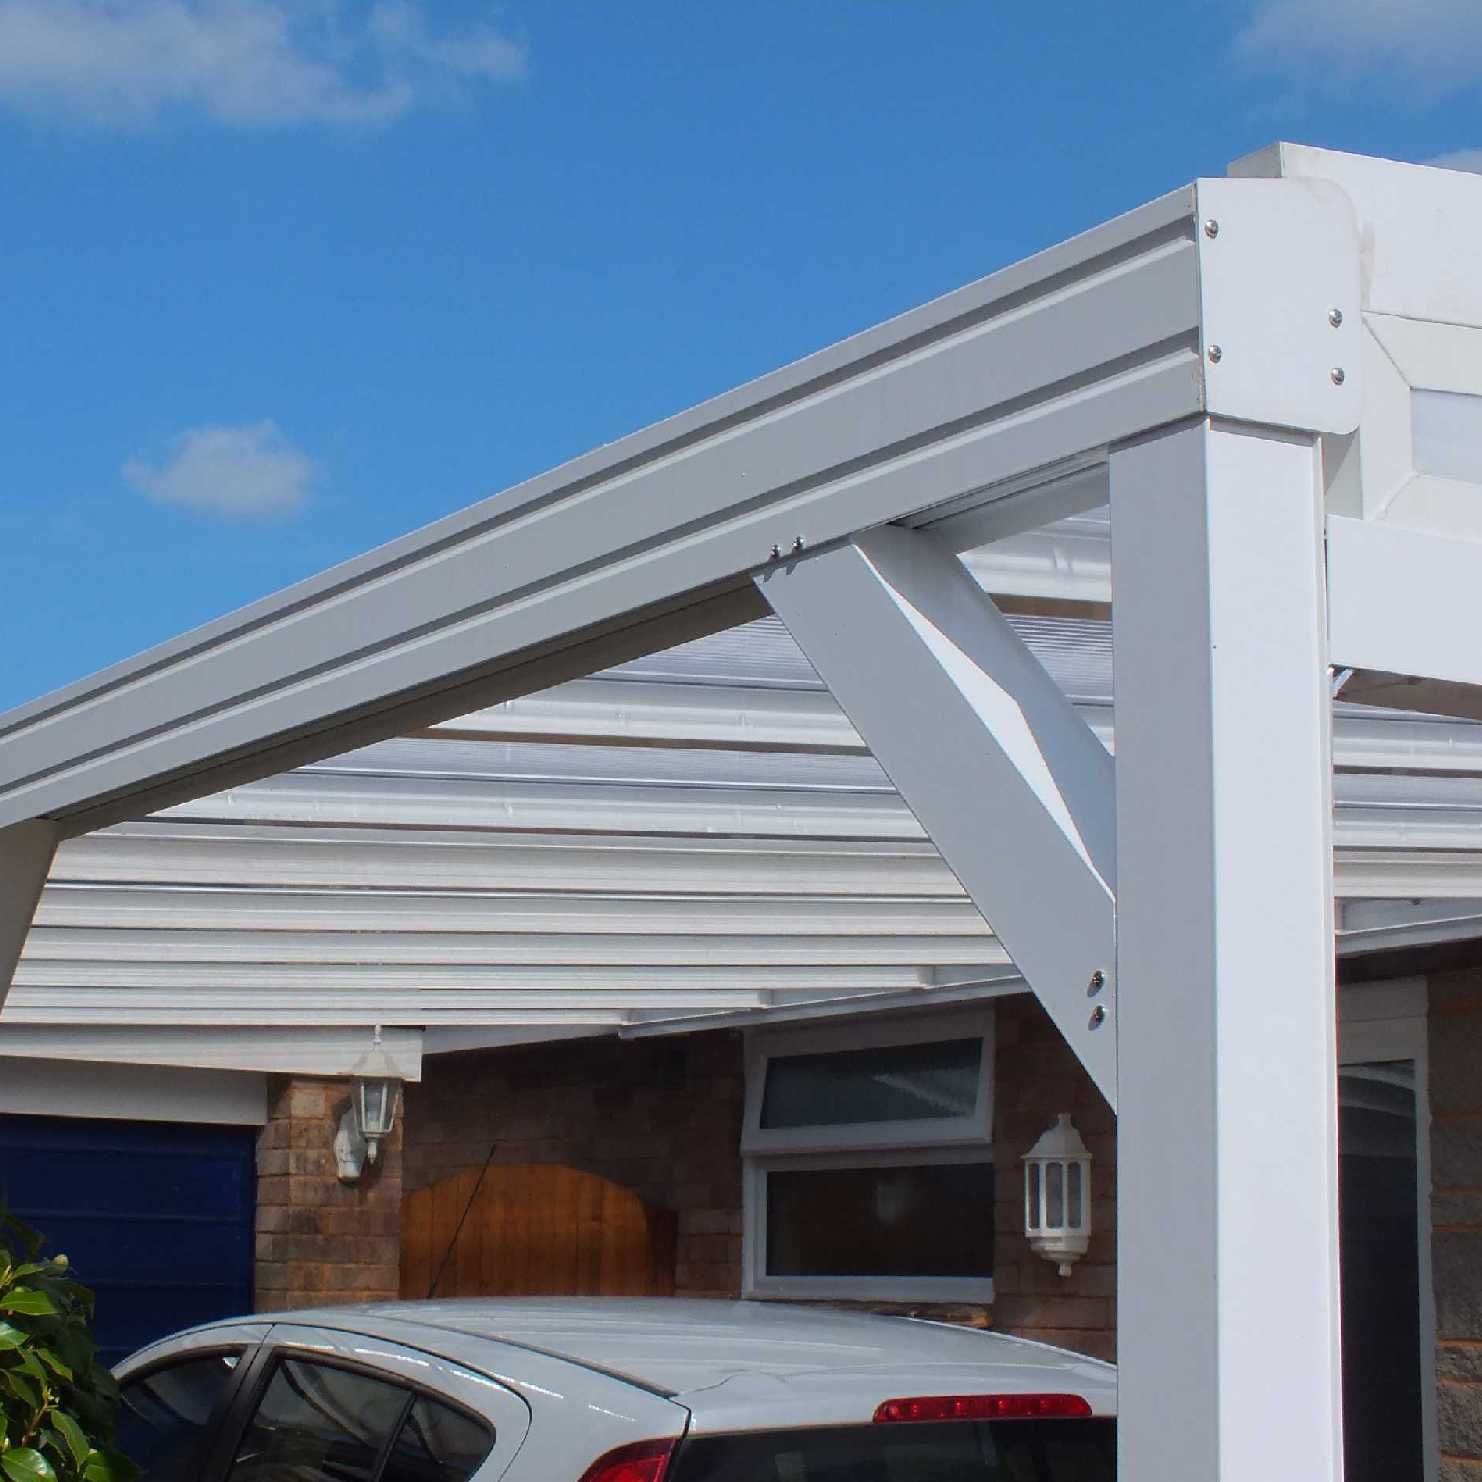 Great deals on Omega Smart Lean-To Canopy, White with 16mm Polycarbonate Glazing - 2.1m (W) x 2.5m (P), (2) Supporting Posts